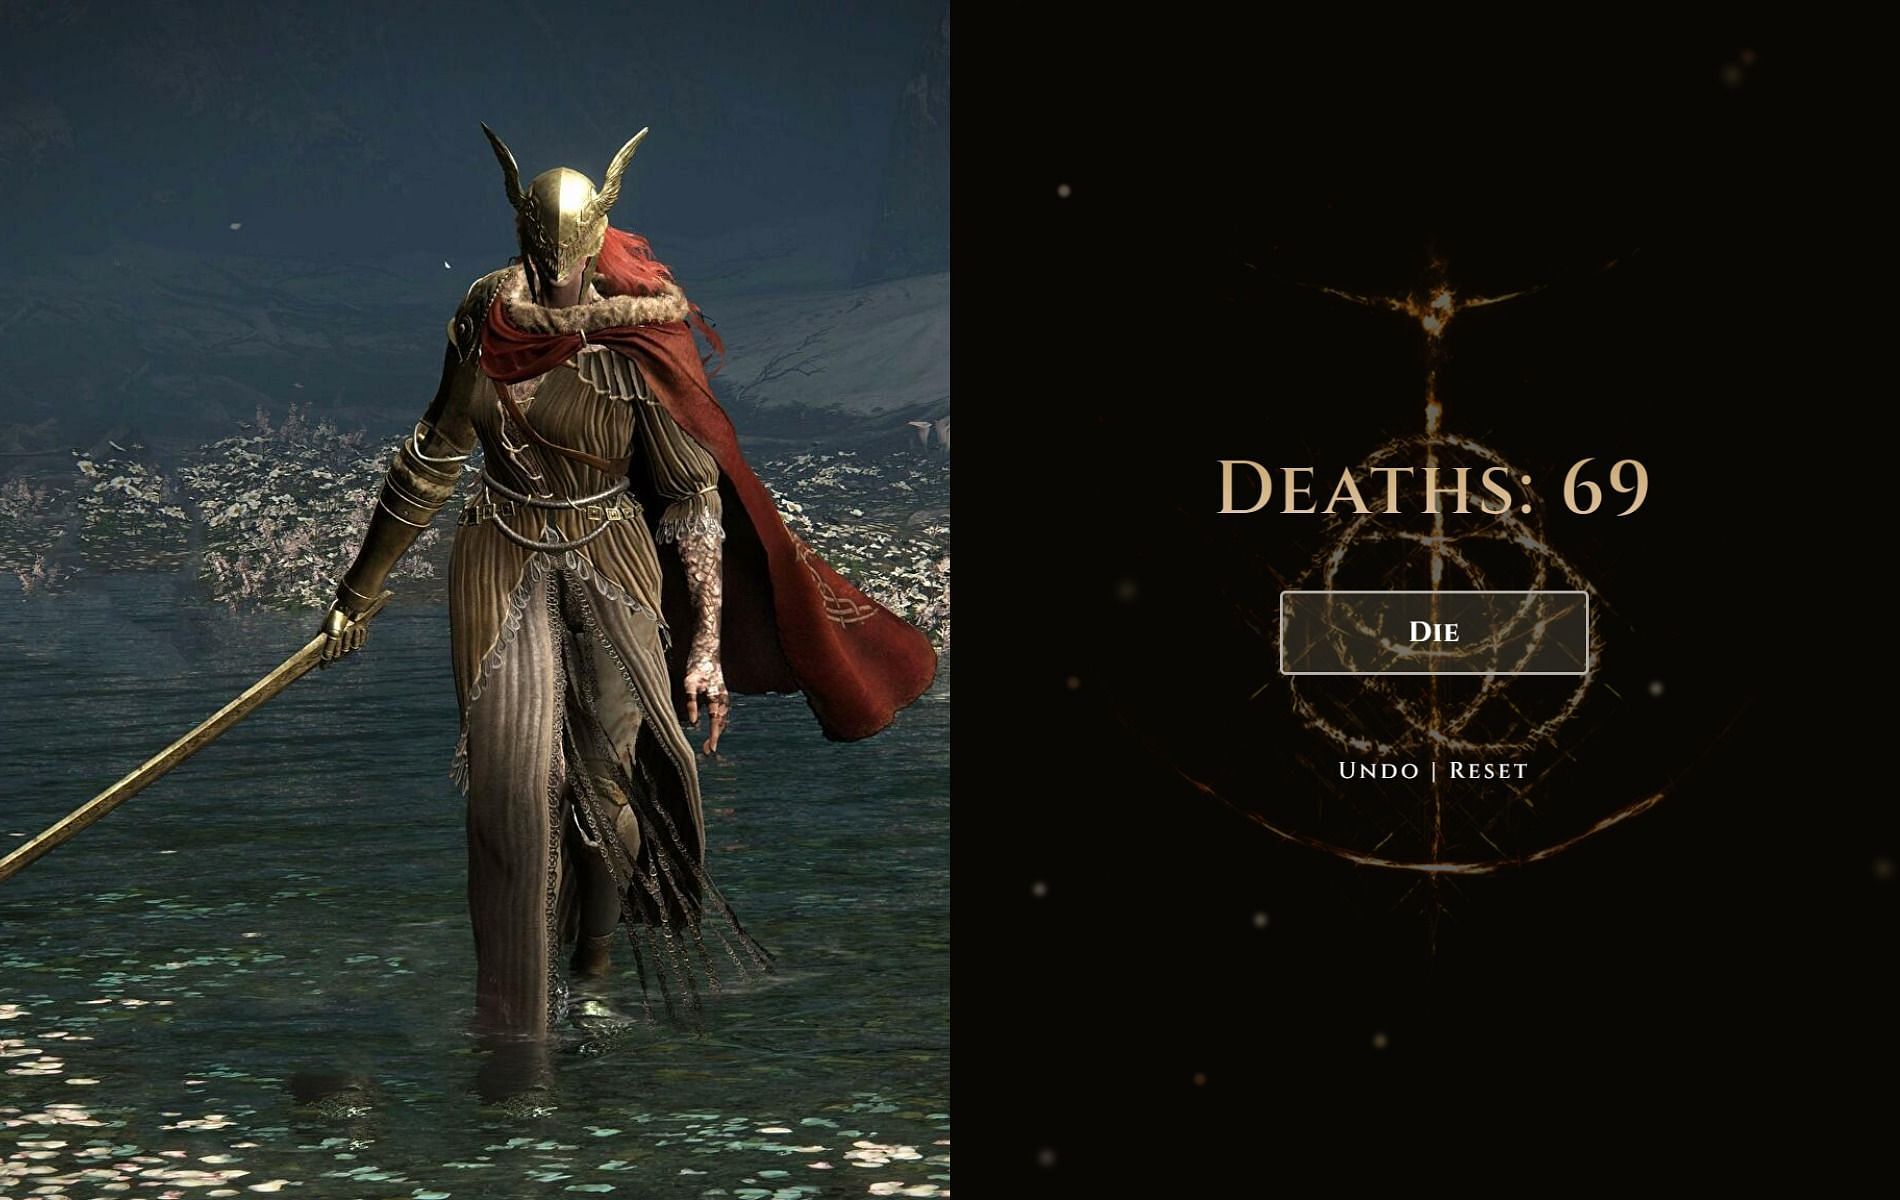 Community creates Elden Ring Death Counter, allowing players to track